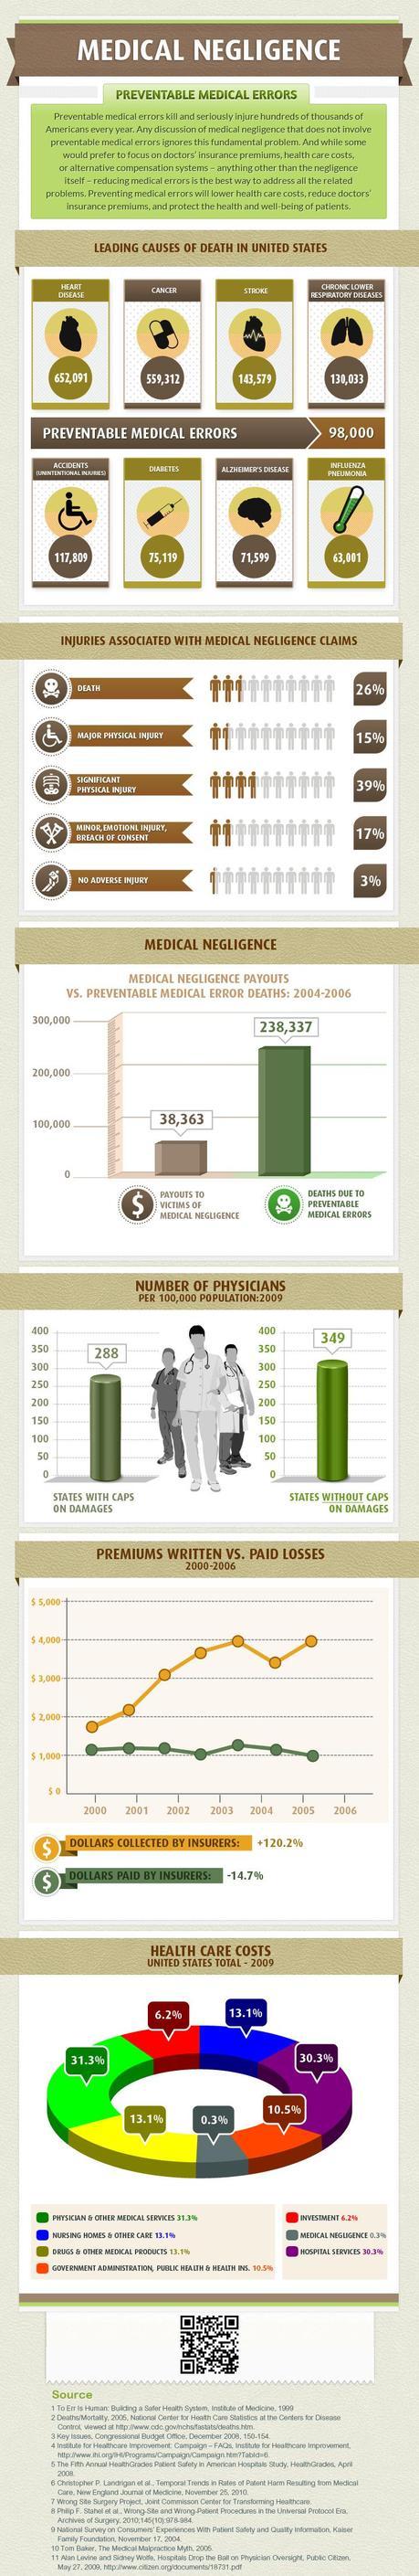 Infographic on Medical Negligence